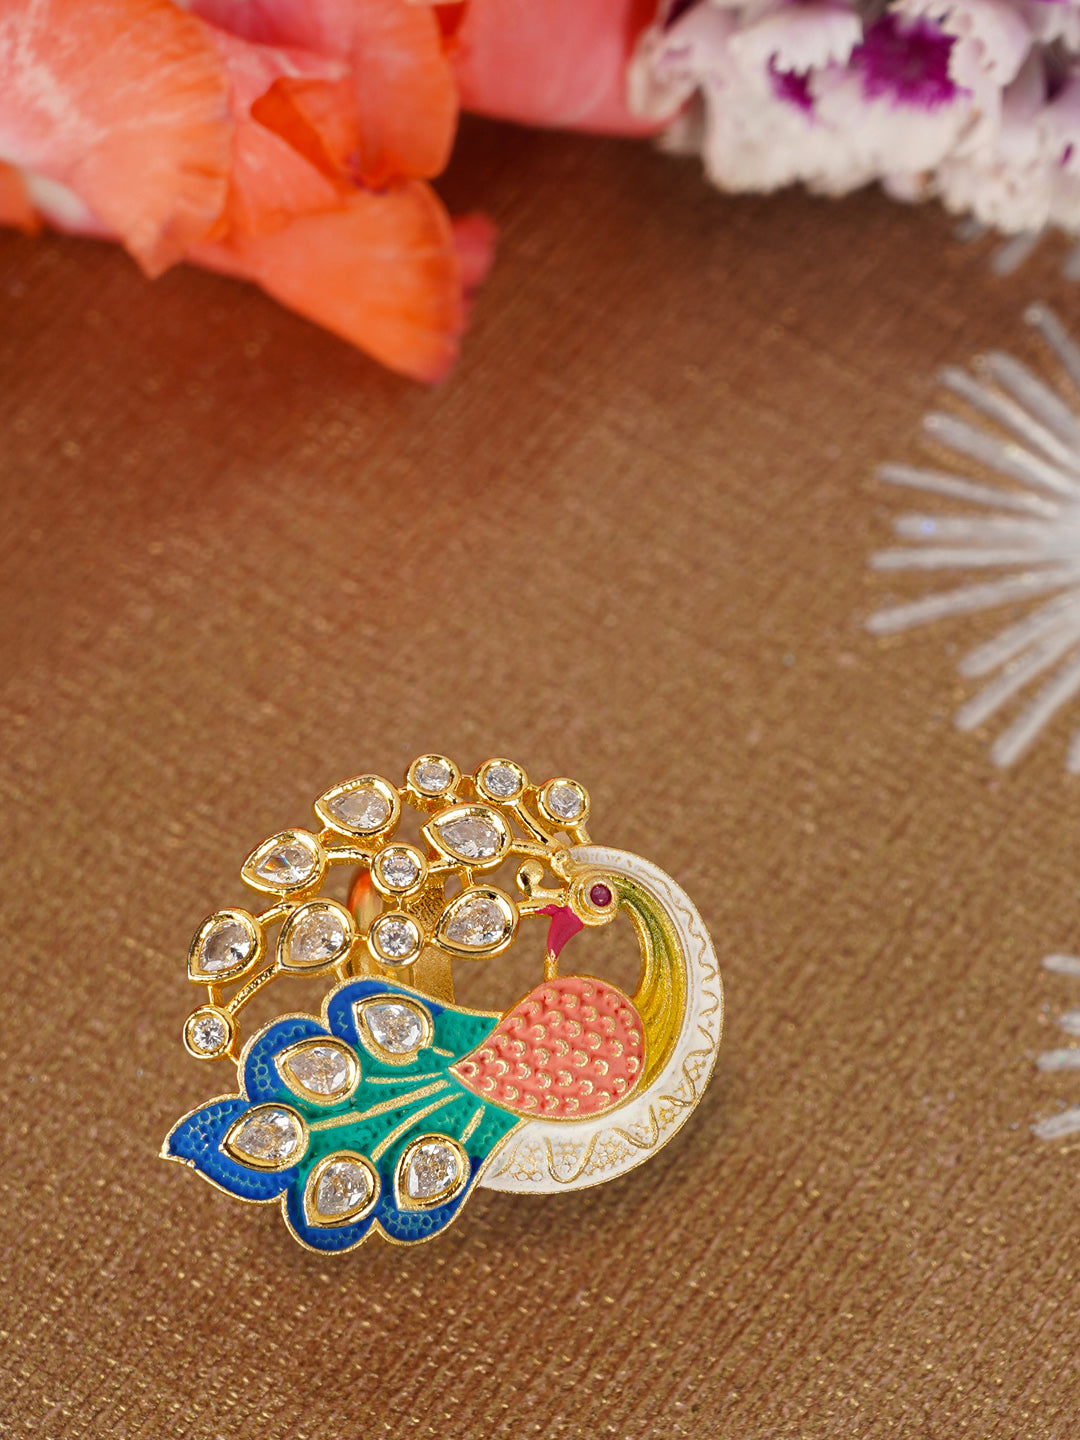 Gold-Plated Peacock Inspired Meenakari Adjustable Ring Studded with American Diamond